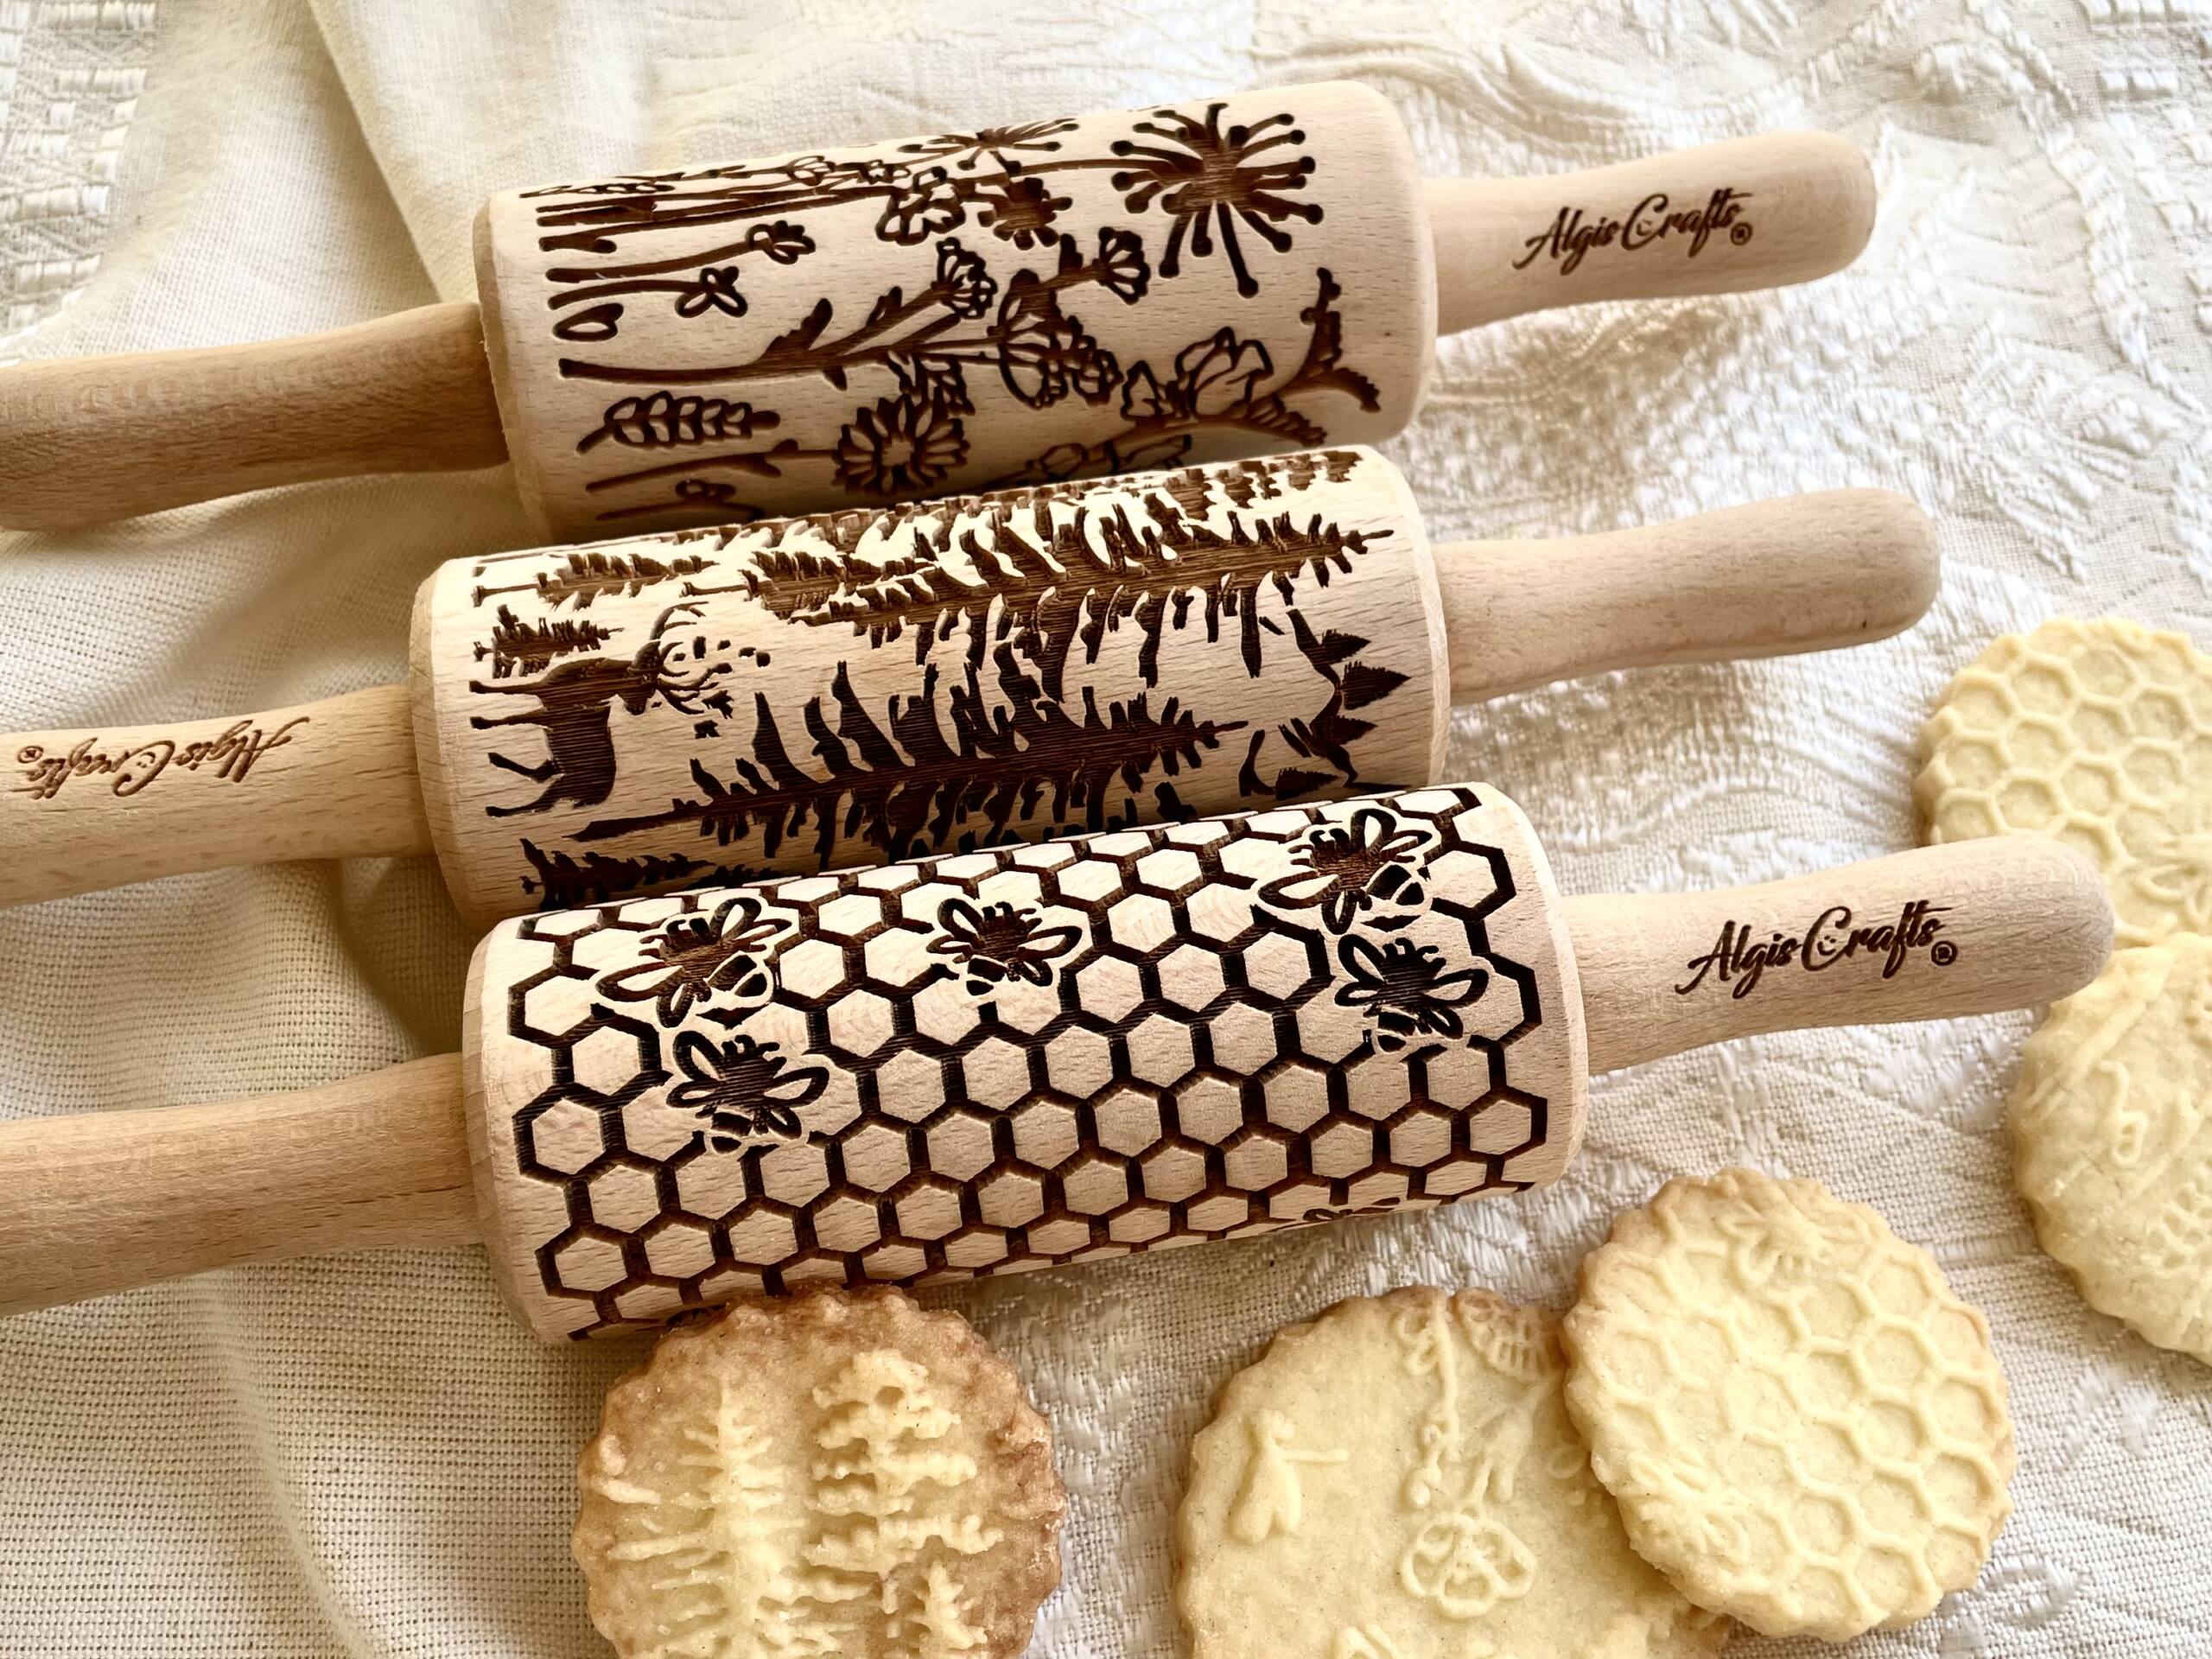 Mini Wooden Rolling Pin, Perfect for Clay, Playdoh, Kids Crafts